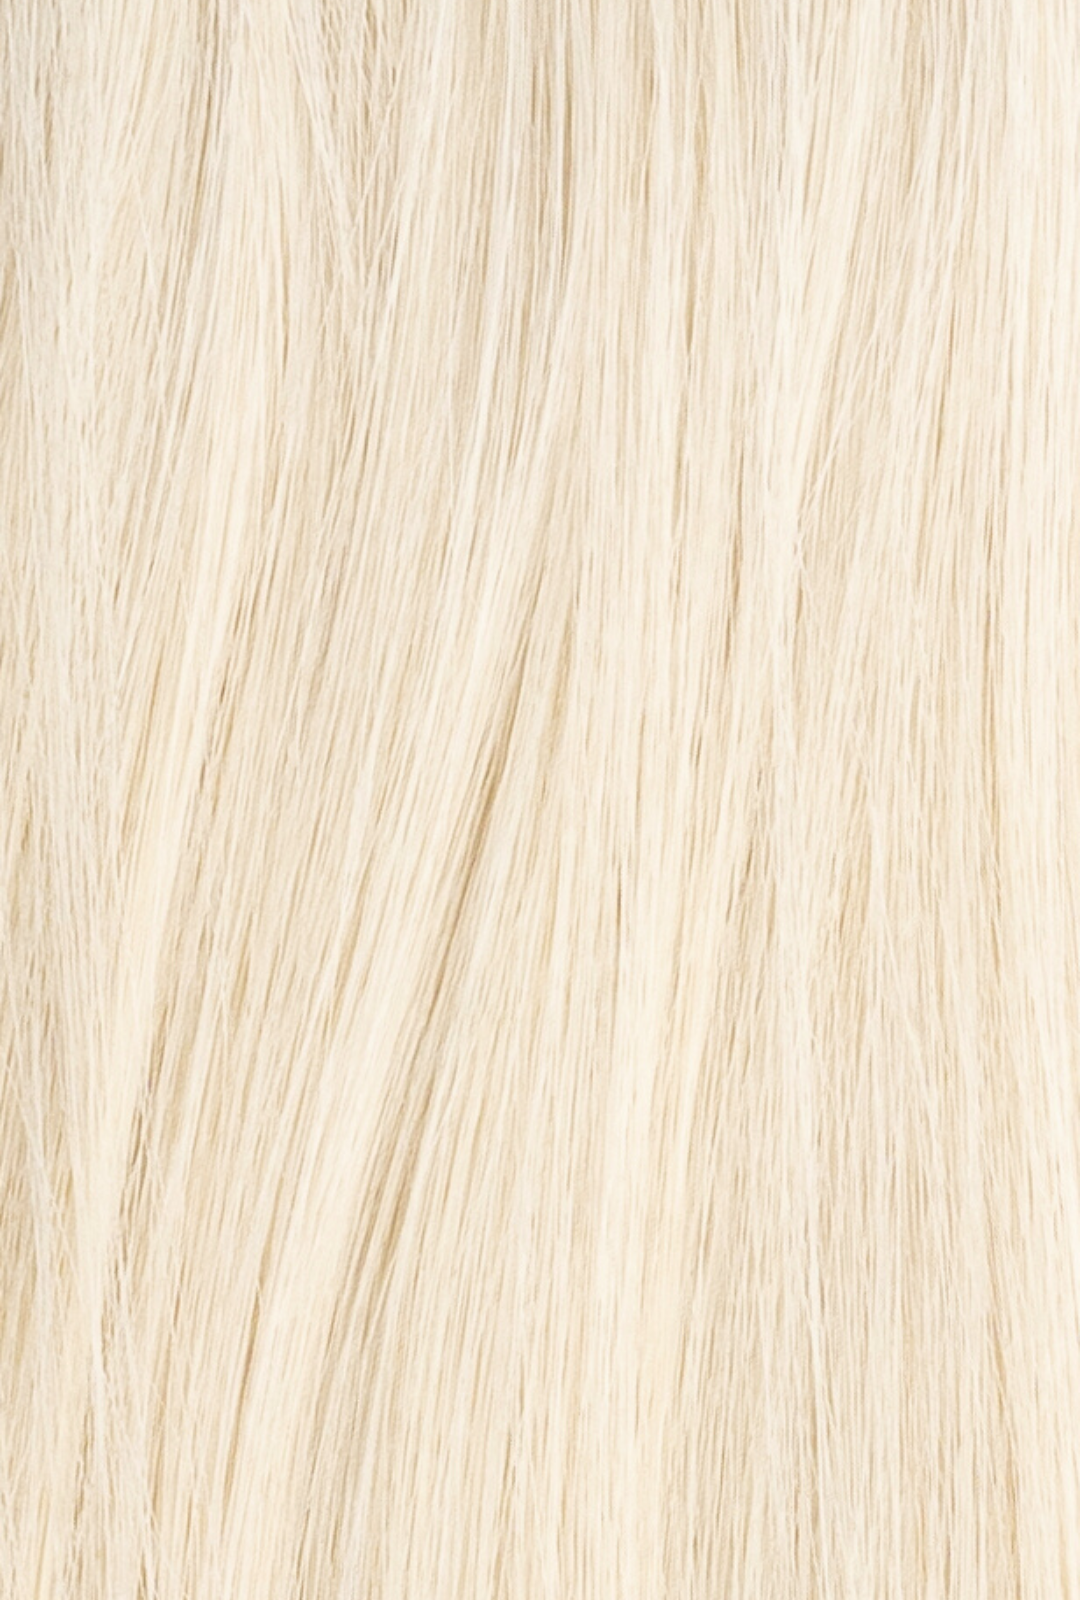 Laced Hair Hand Tied Weft Extensions #60 (Platinum)